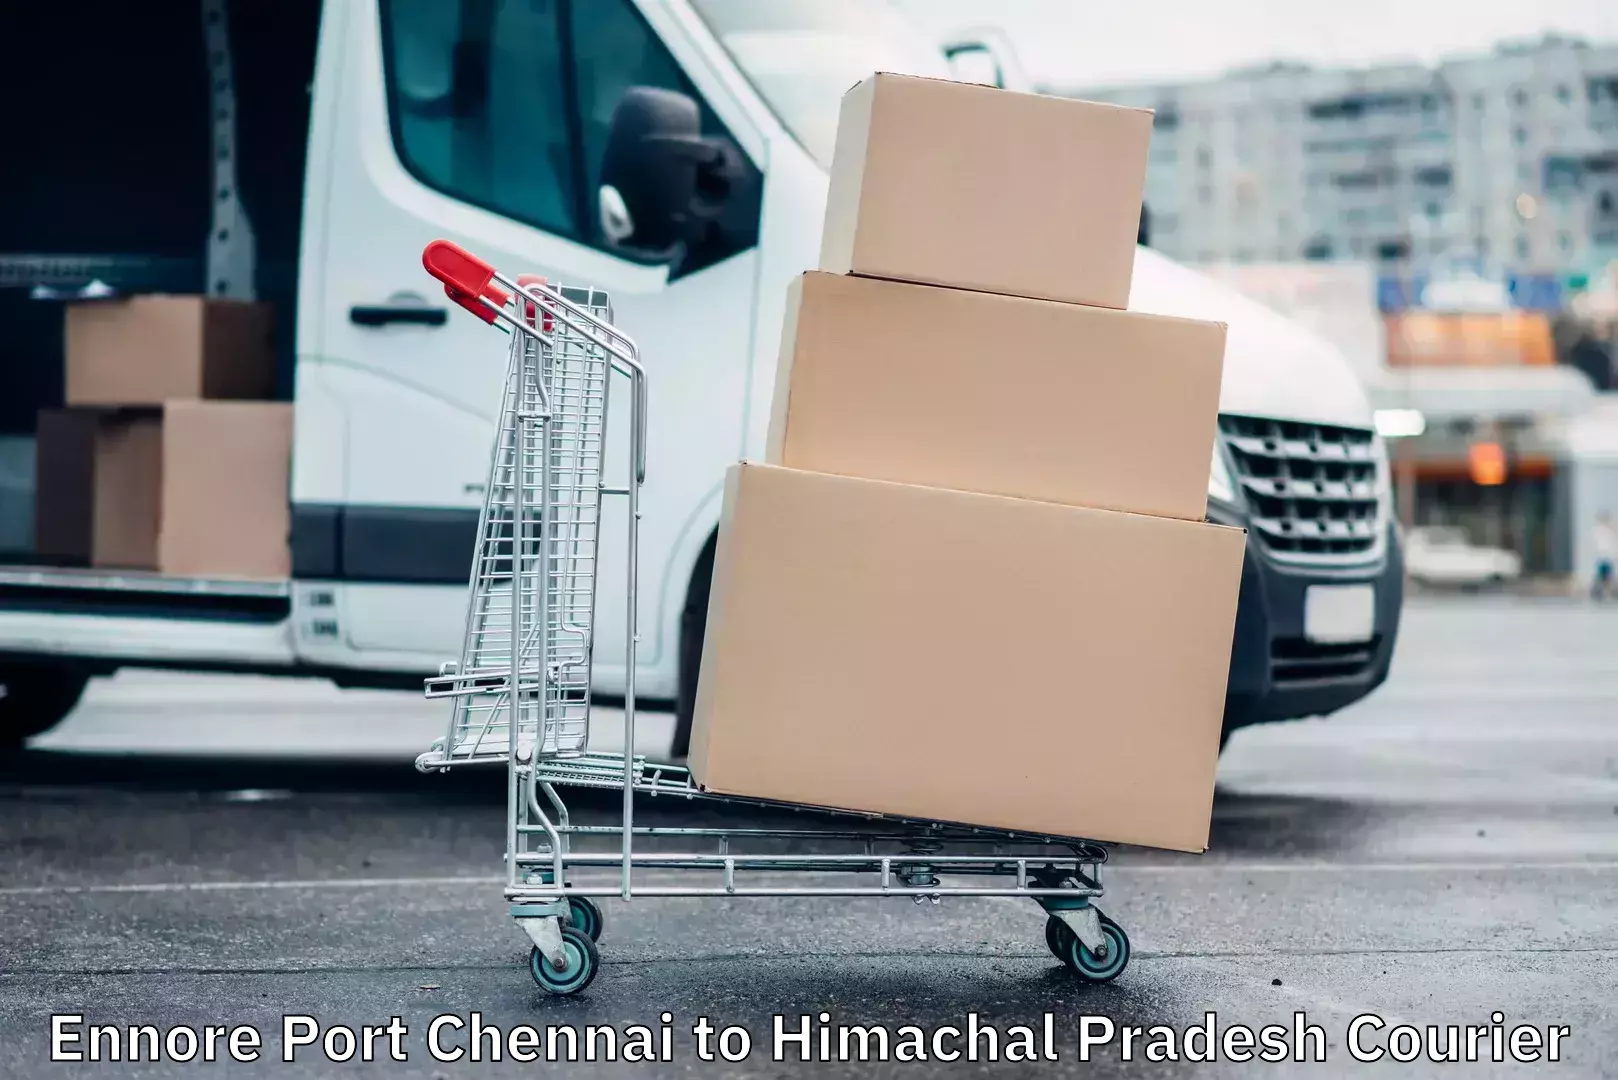 Global courier networks Ennore Port Chennai to Himachal Pradesh